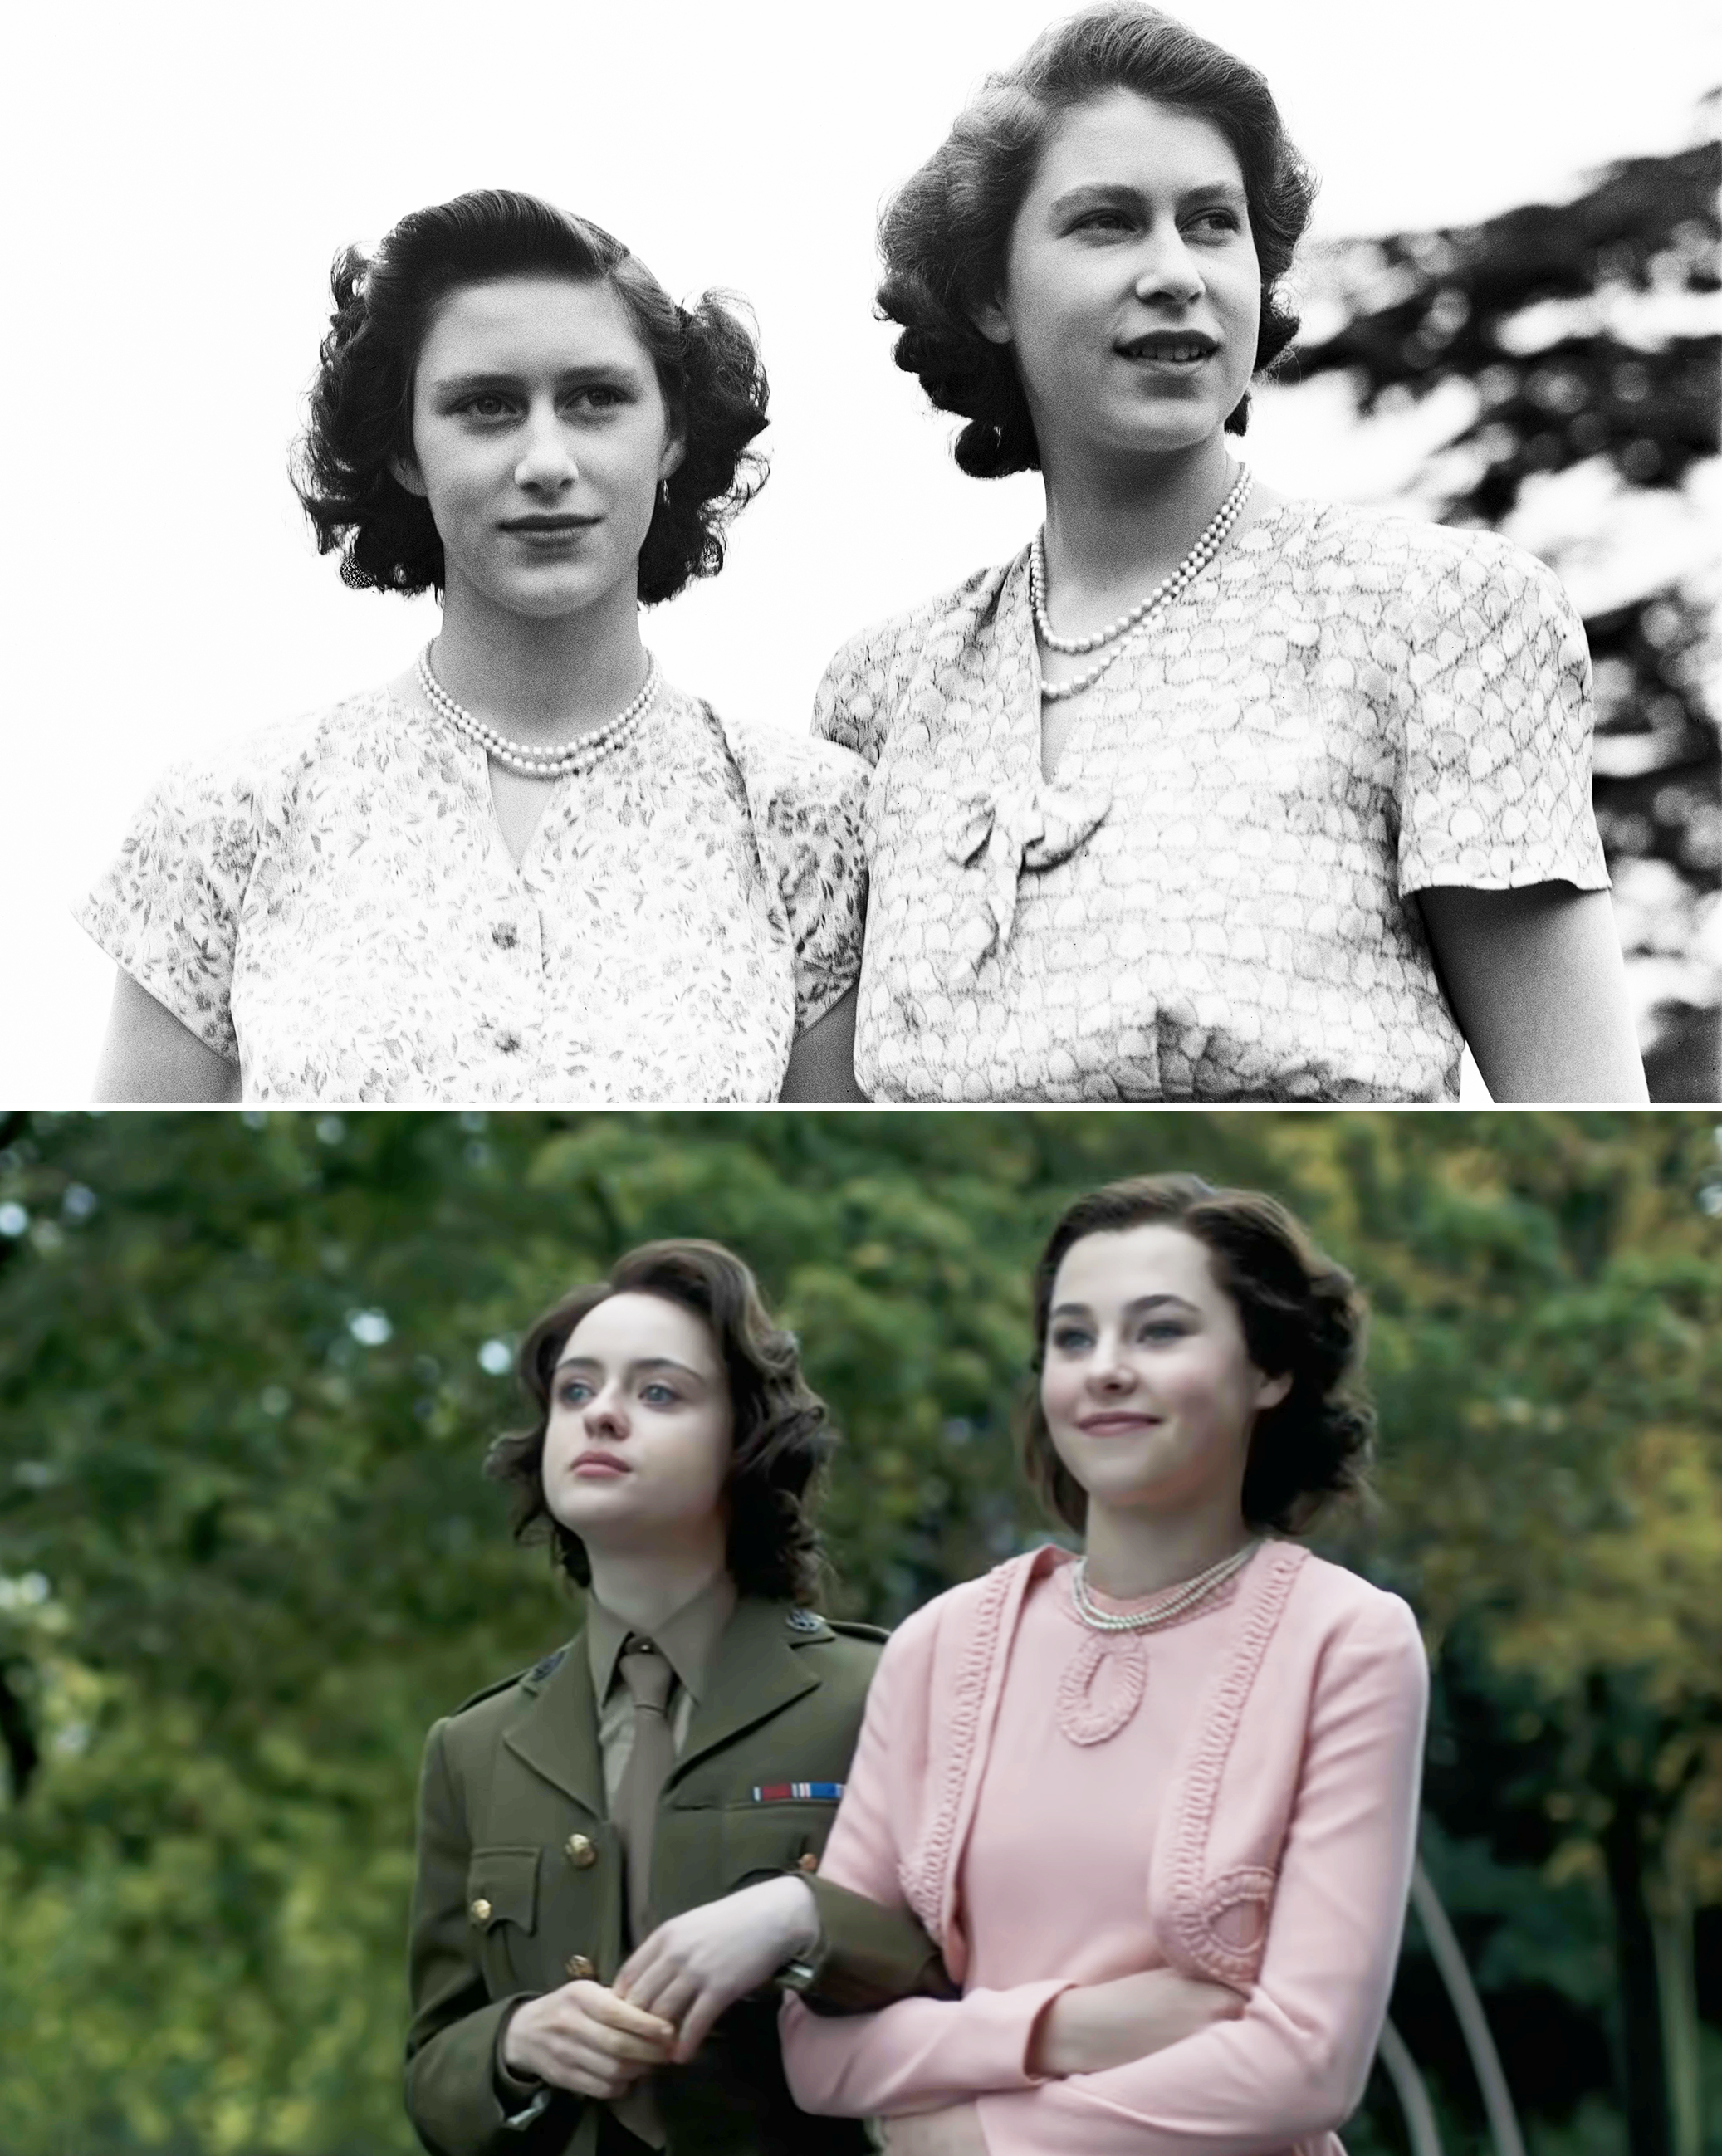 The real Margaret and Elizabeth wearing short-sleeved dresses and their Crown versions are in arm and wearing a military uniform (Elizabeth) and a blouse and cardigan (Margaret)